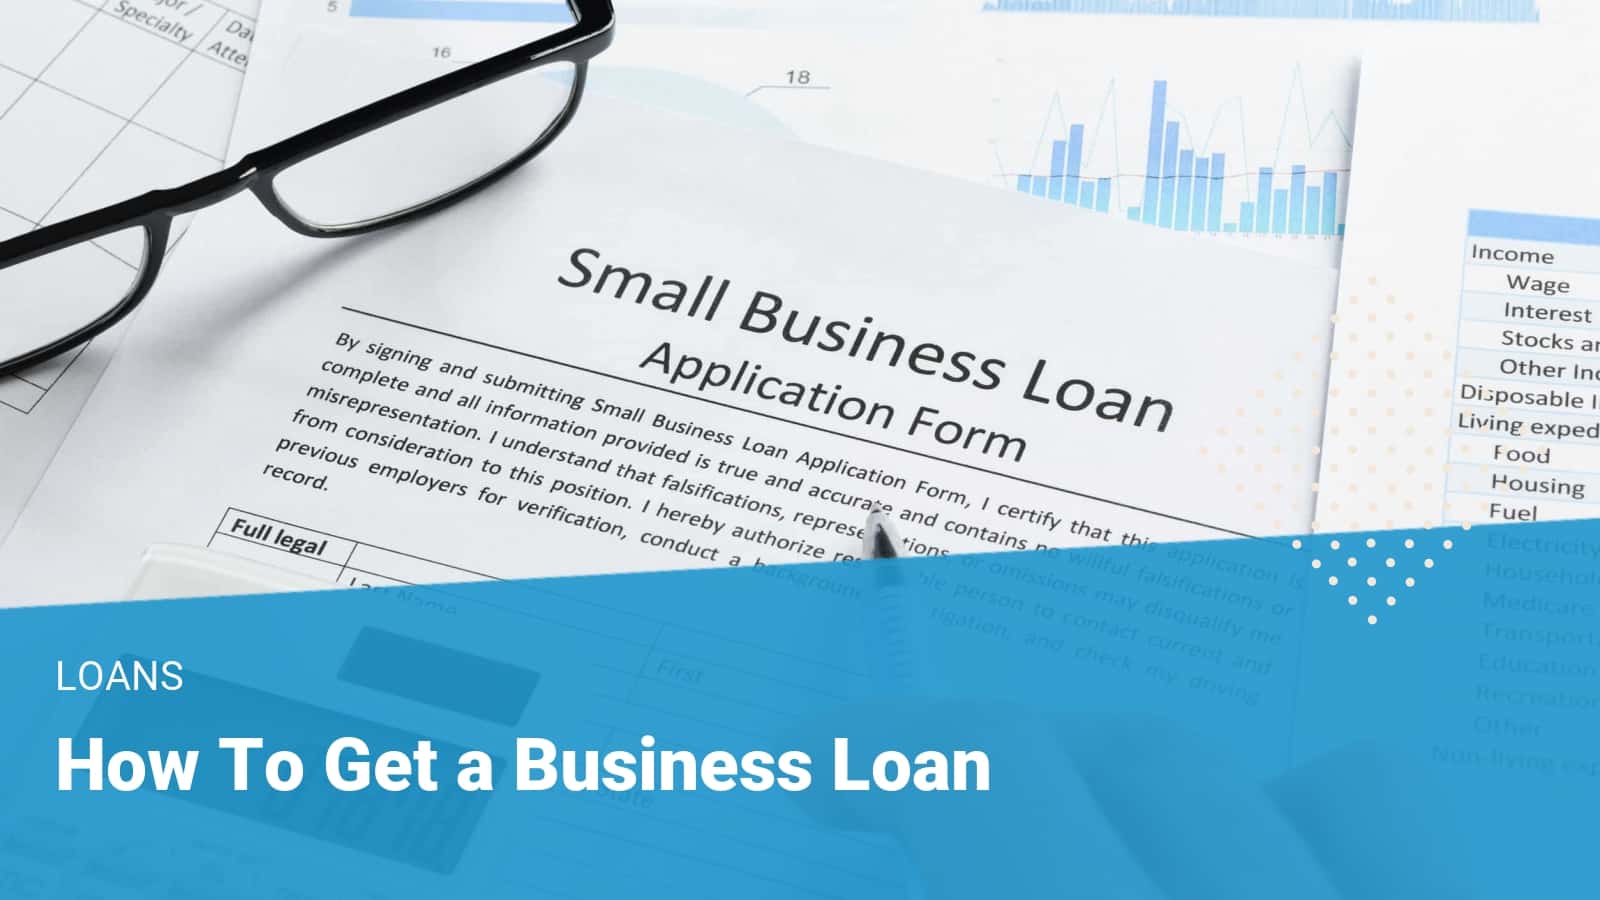 How To Get a Business Loan